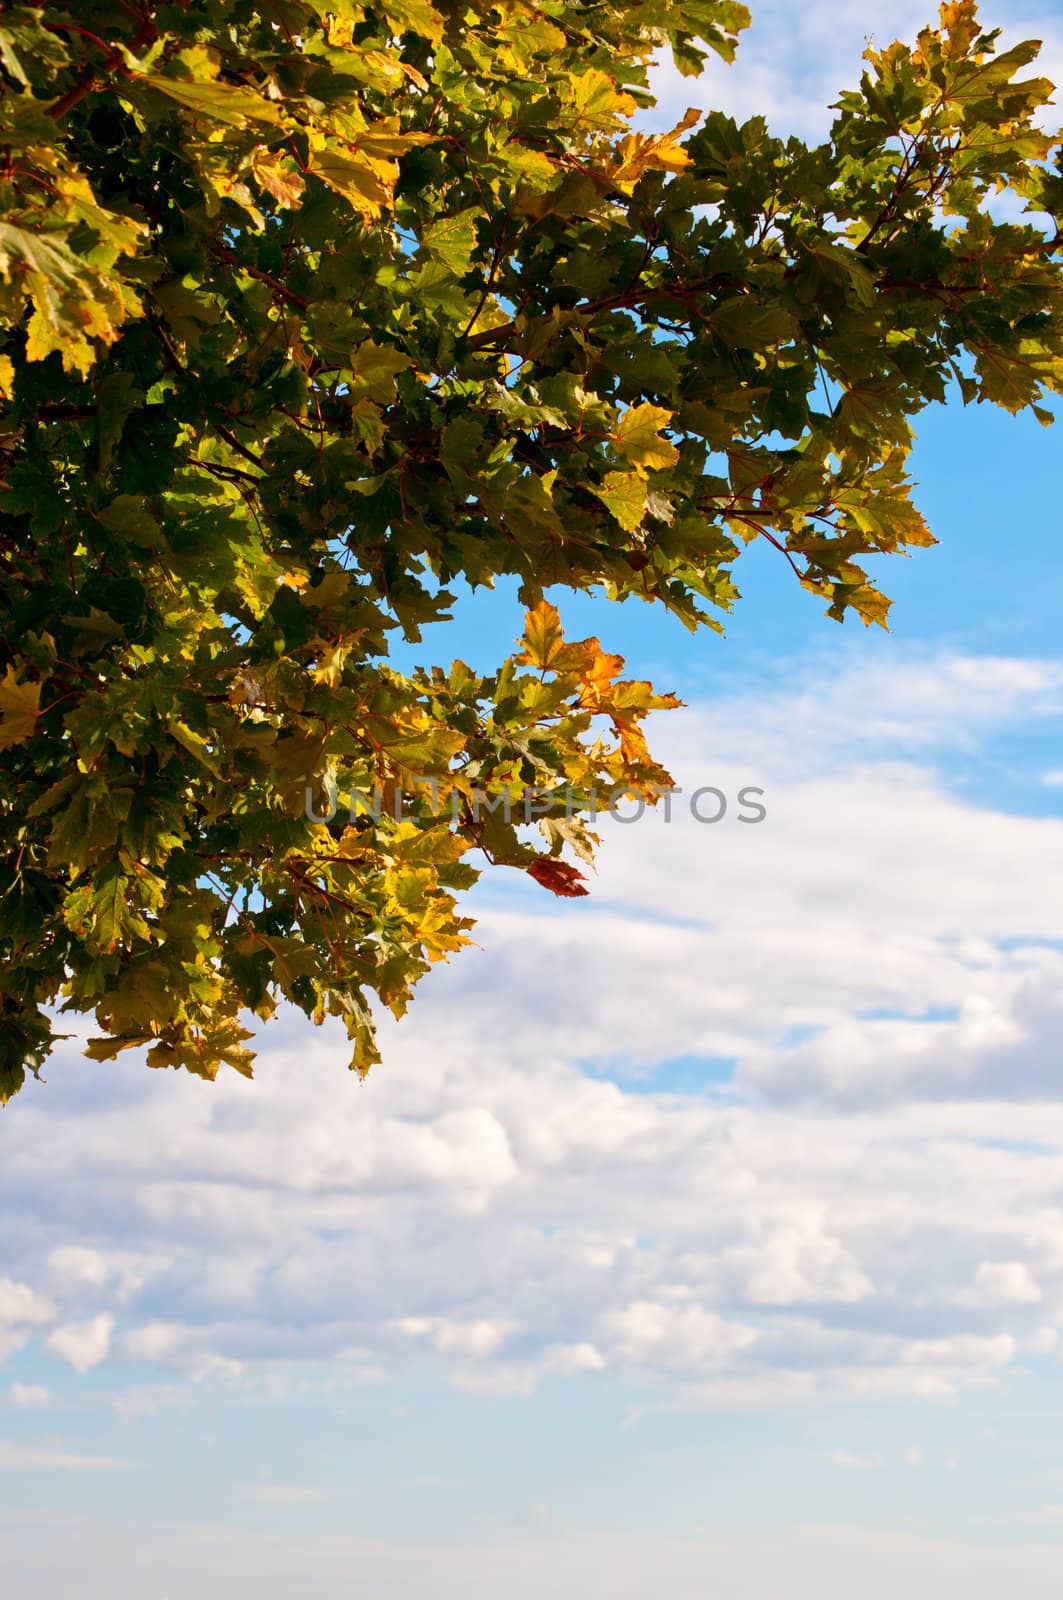 Oak tree in autumn colors against a blue sky with some clouds.